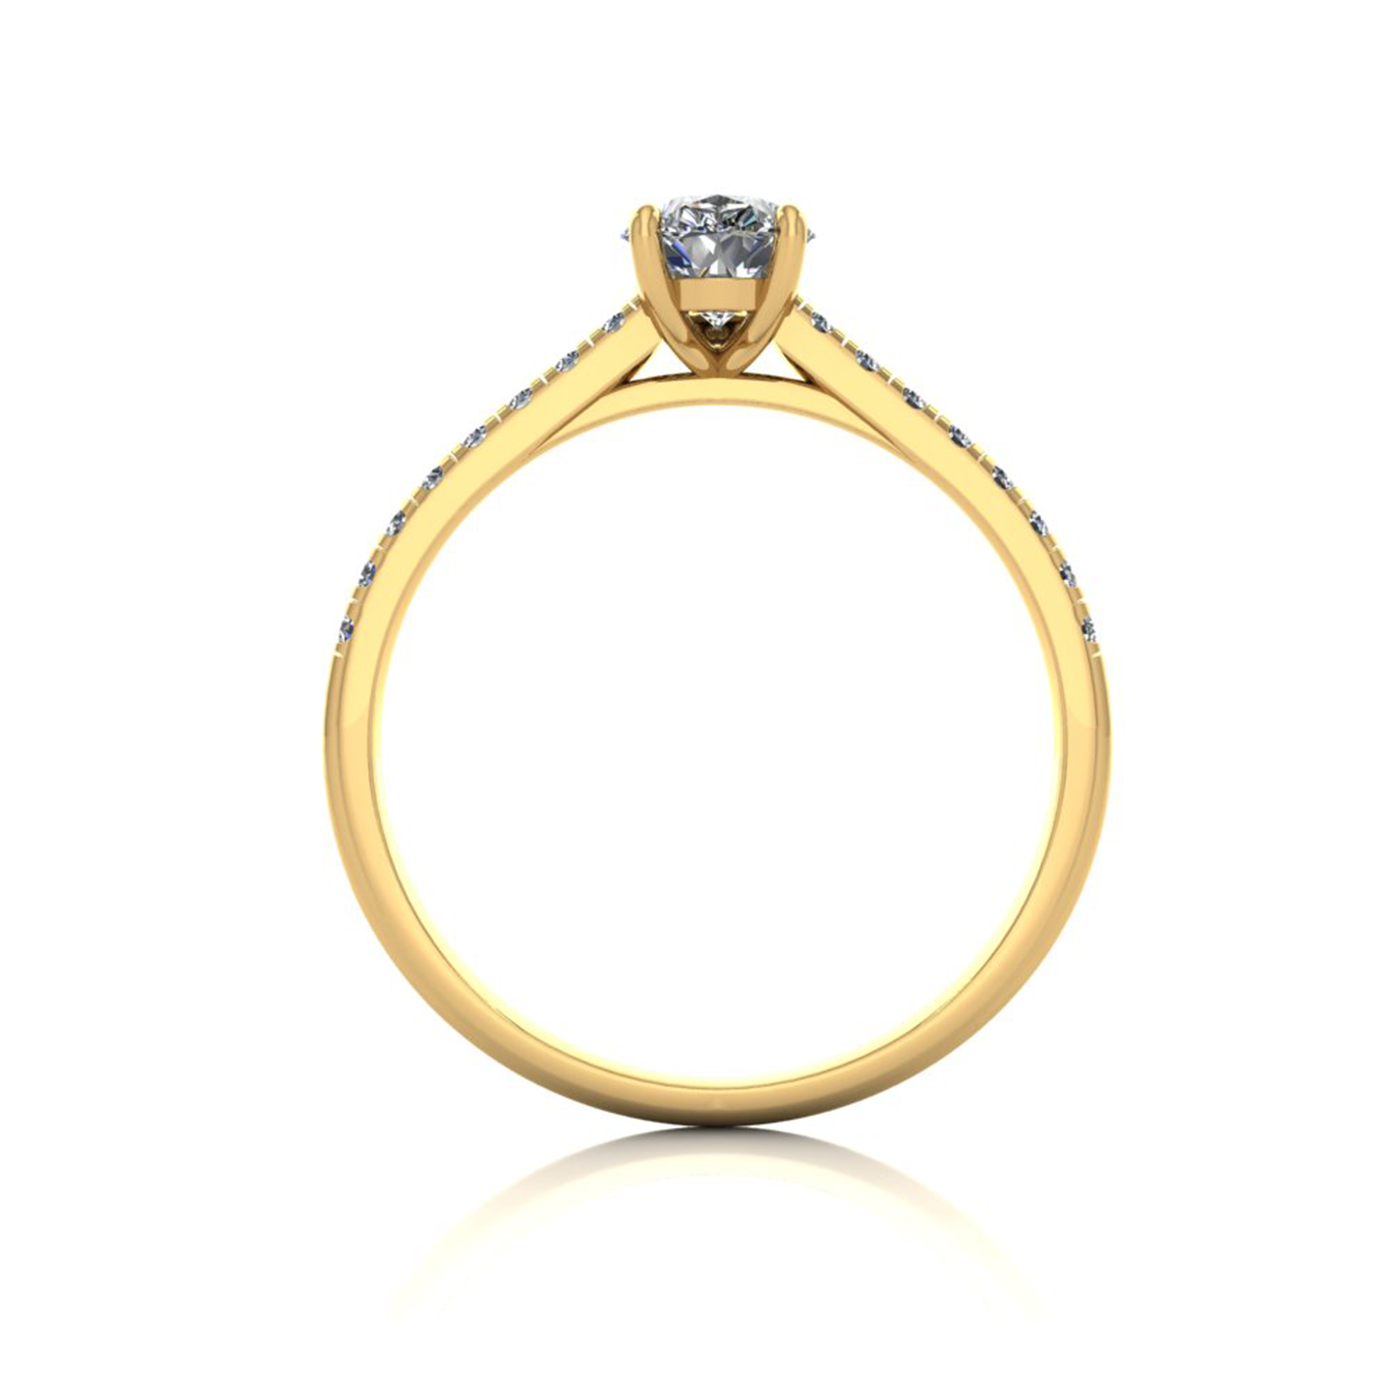 18k yellow gold 0,80 ct 3 prongs pear diamond engagement ring with whisper thin pavÉ set band